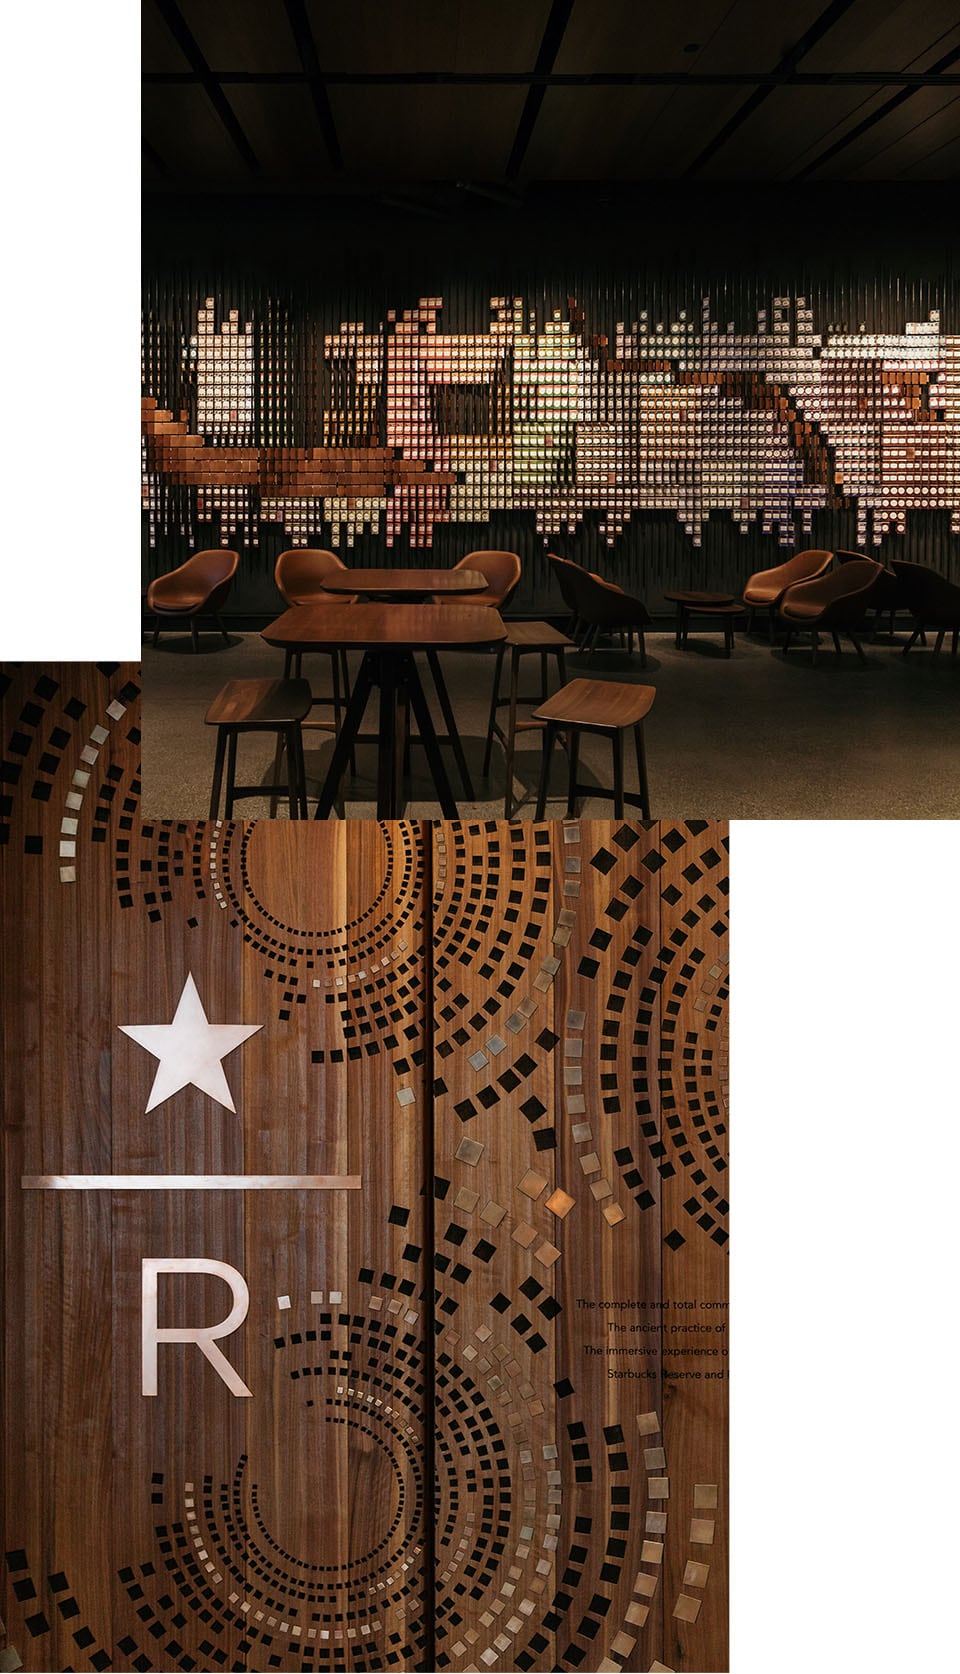 Collage of interior space with wooden furniture and art piece on wall and abstract image of Starbucks Reserve logo and decorative items on wood